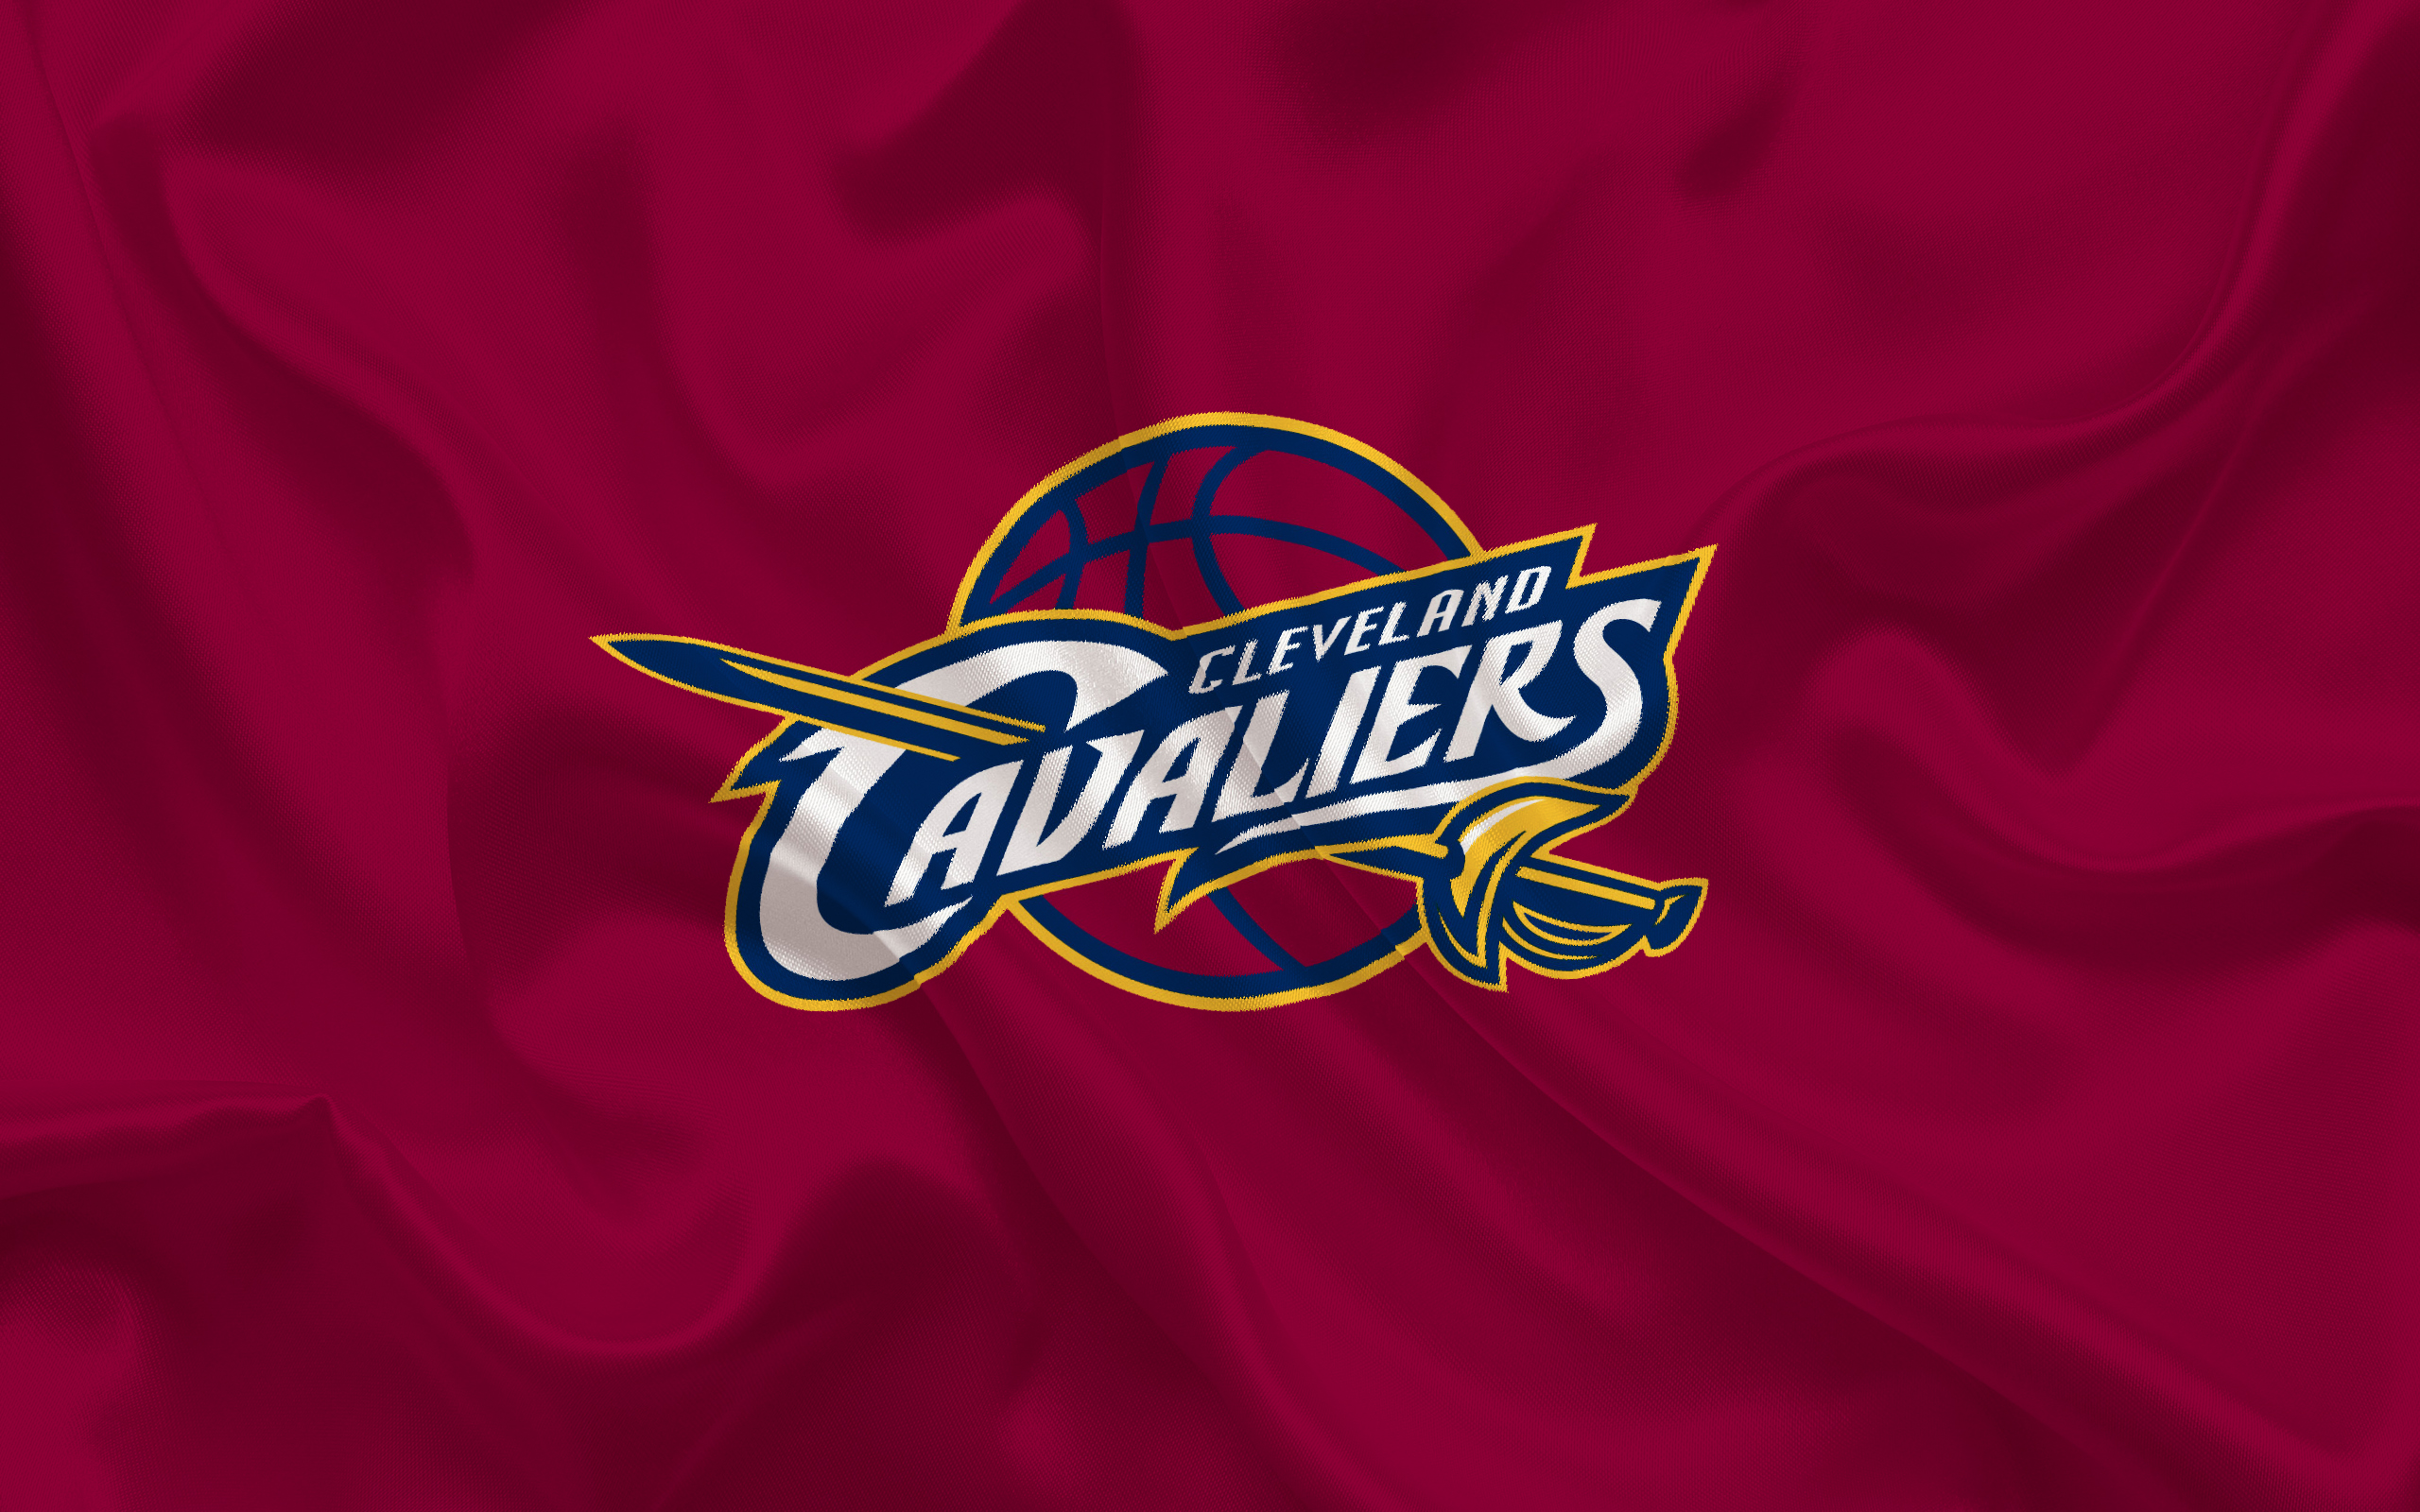 Cleveland Cavaliers Tickets